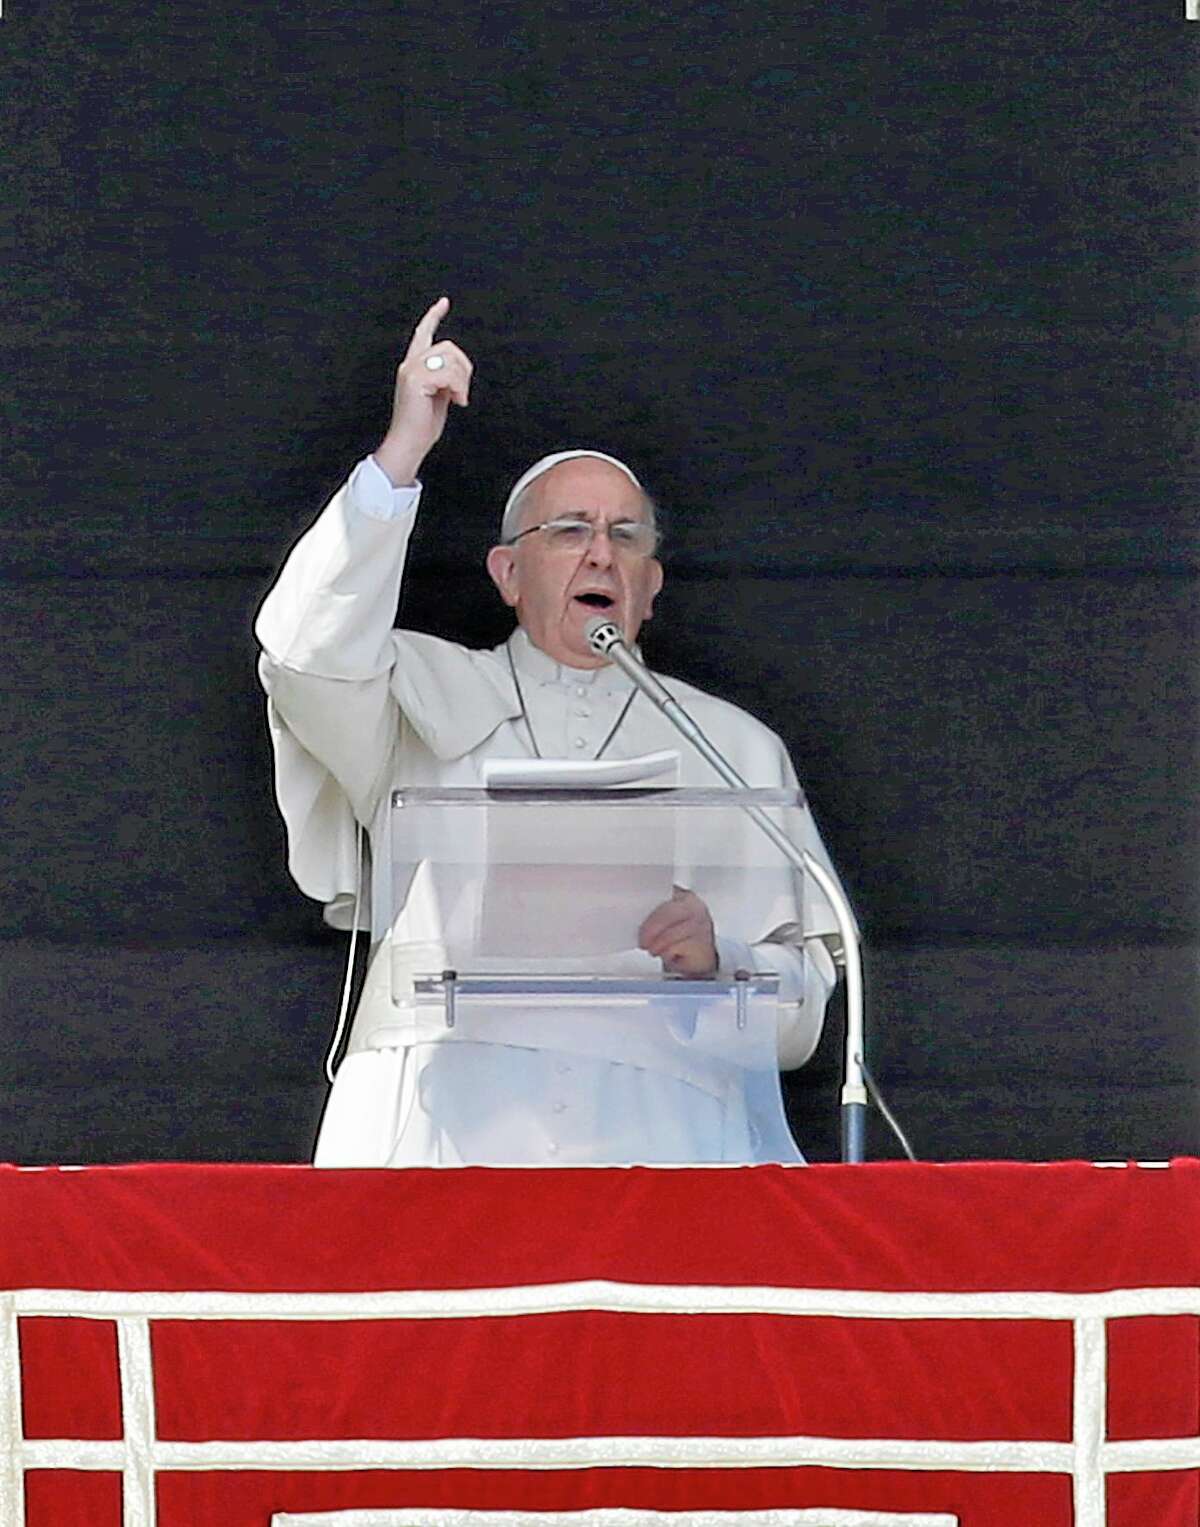 Pope Francis delivers his message on the occasion of the Angelus noon prayer in St. Peter's Square, at the Vatican, Sunday, March 16, 2014. (AP Photo/Gregorio Borgia)